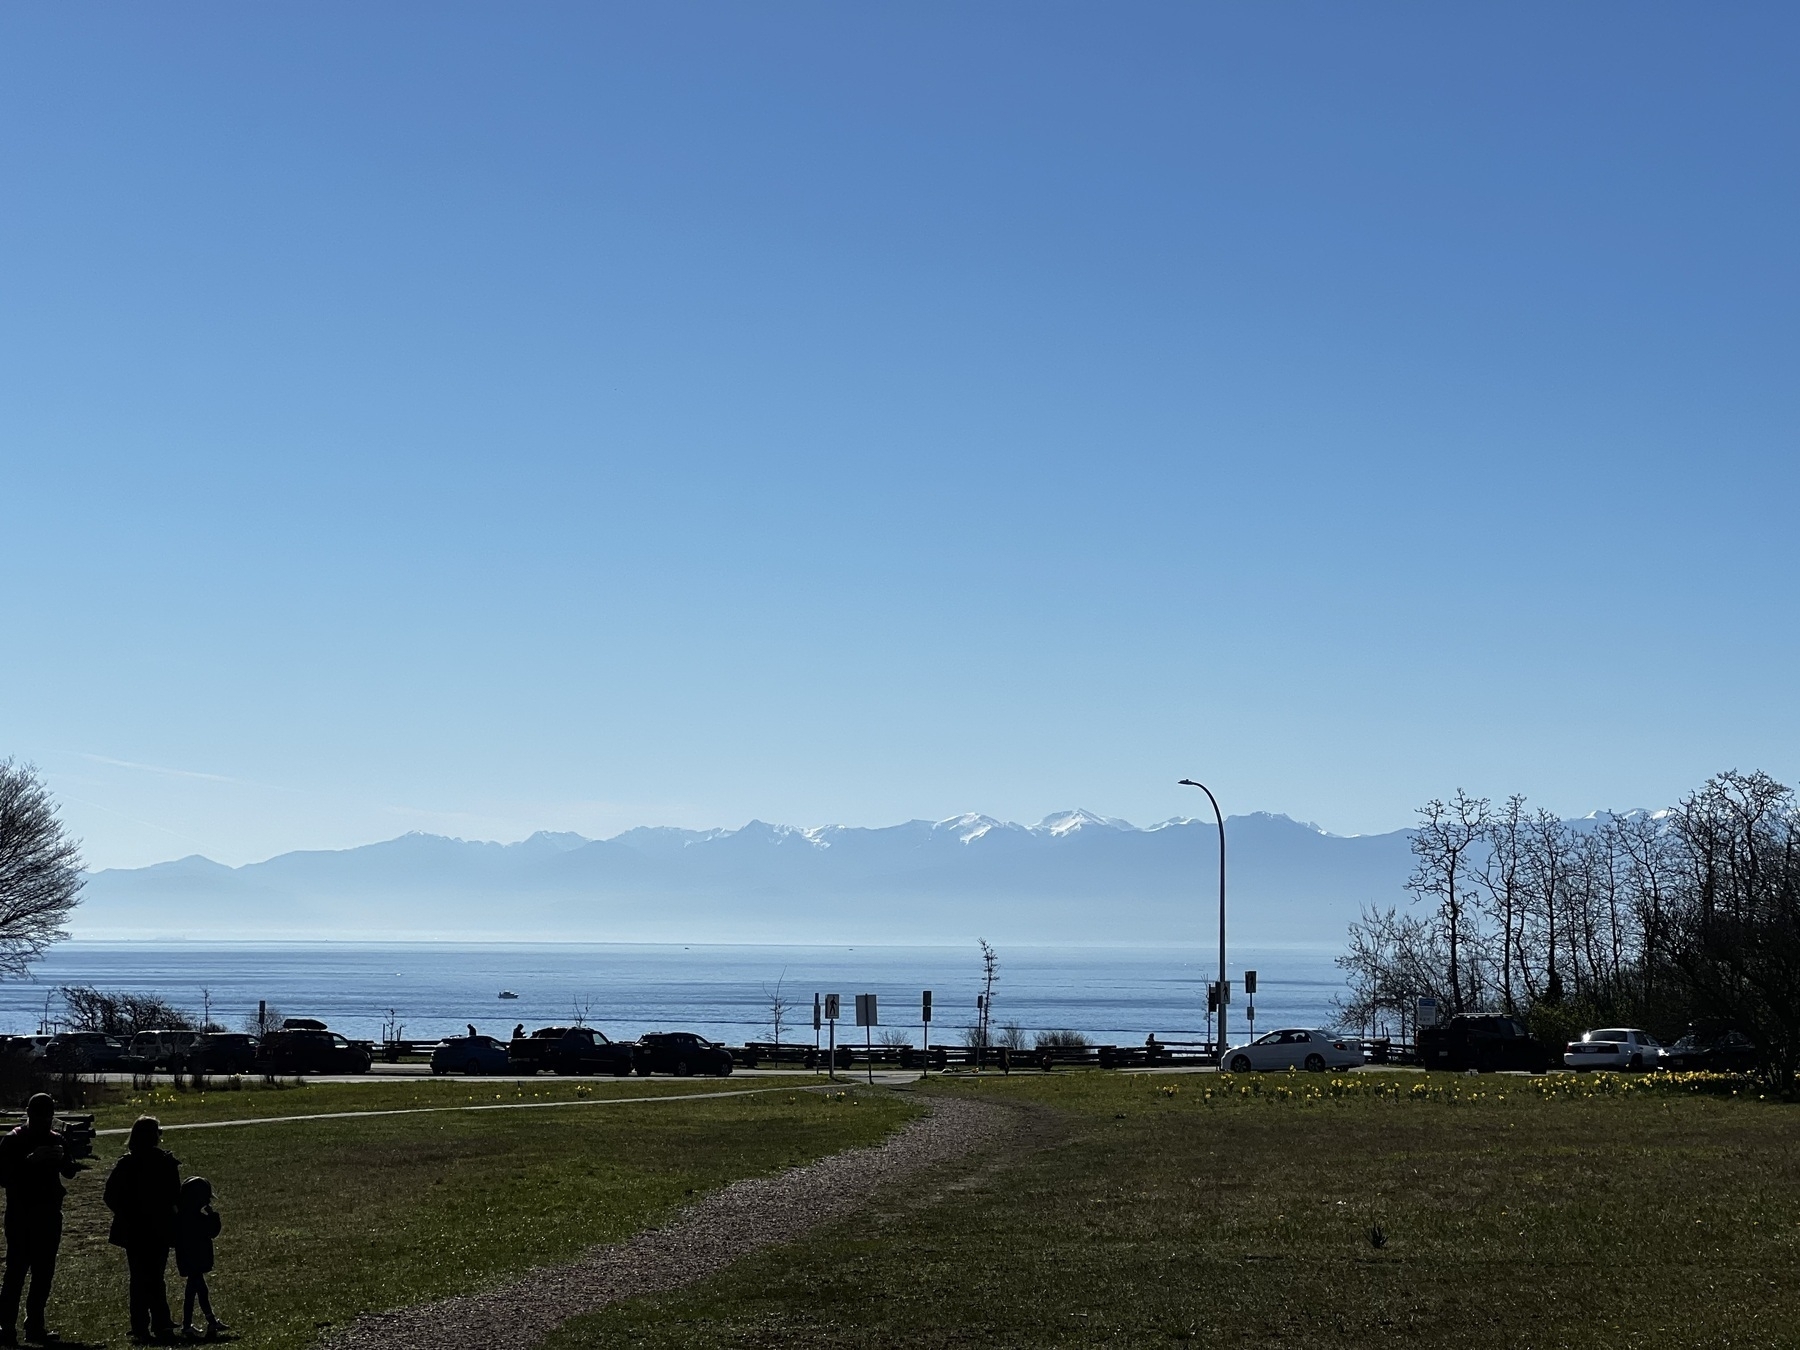 Photo of a green grassy field in the foreground. Far in the distance are the snow-capped Olympic Mountains